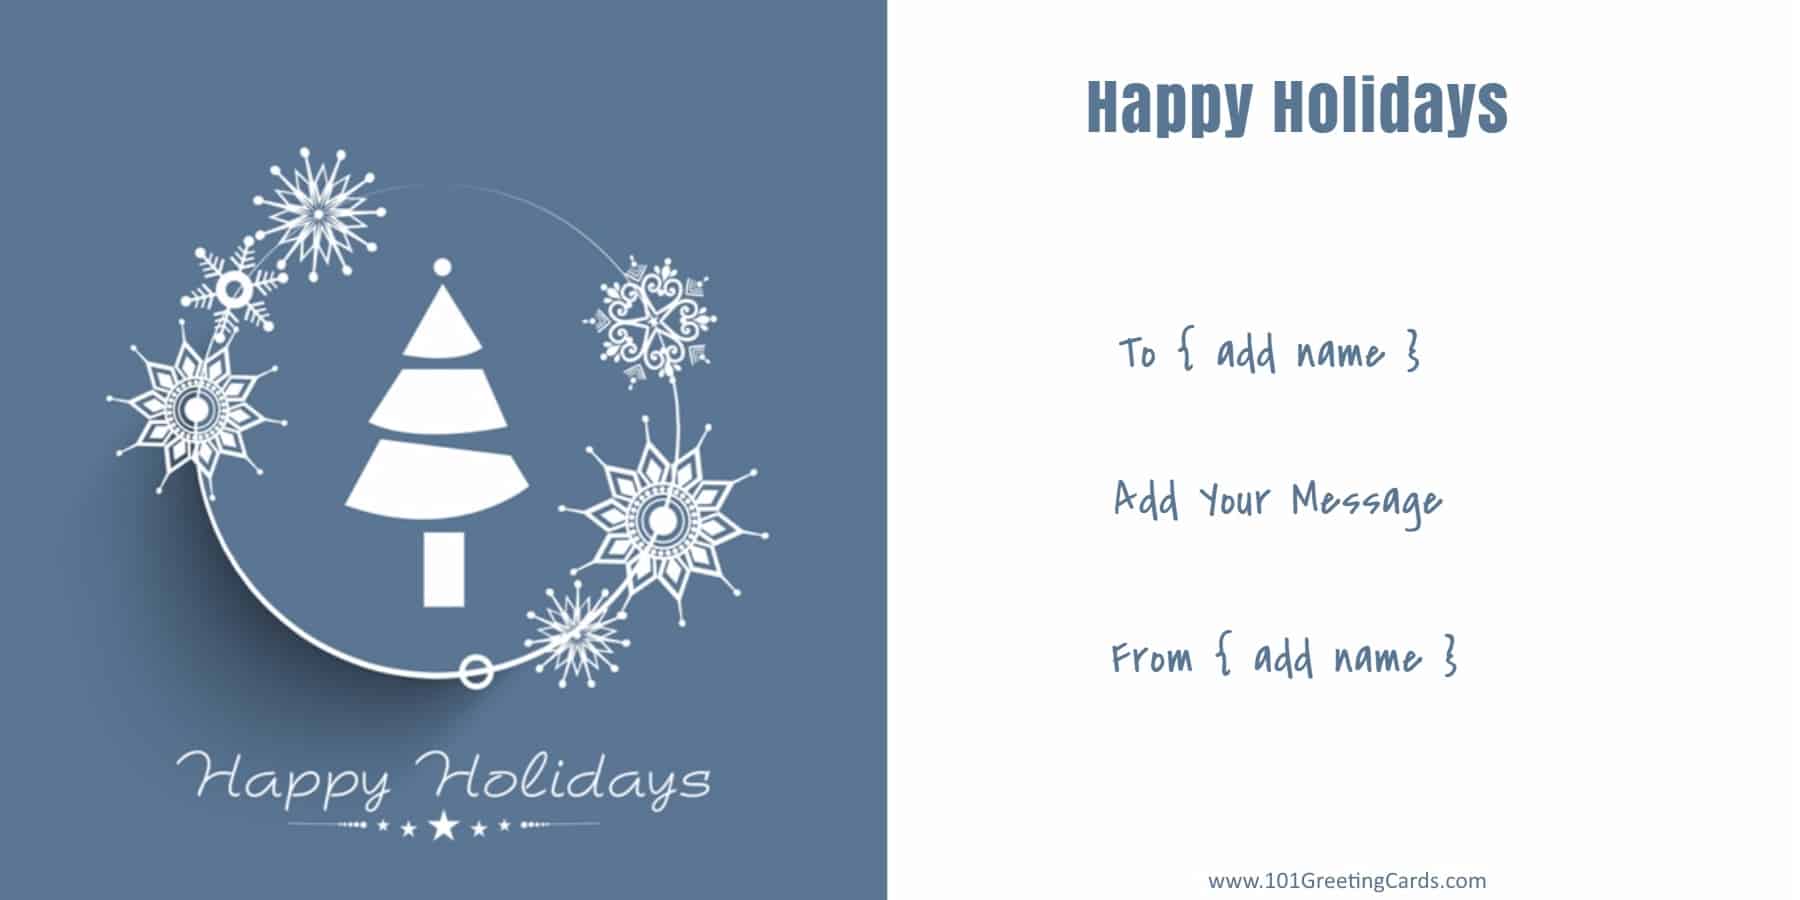 Happy Holidays Card Template from www.101greetingcards.com